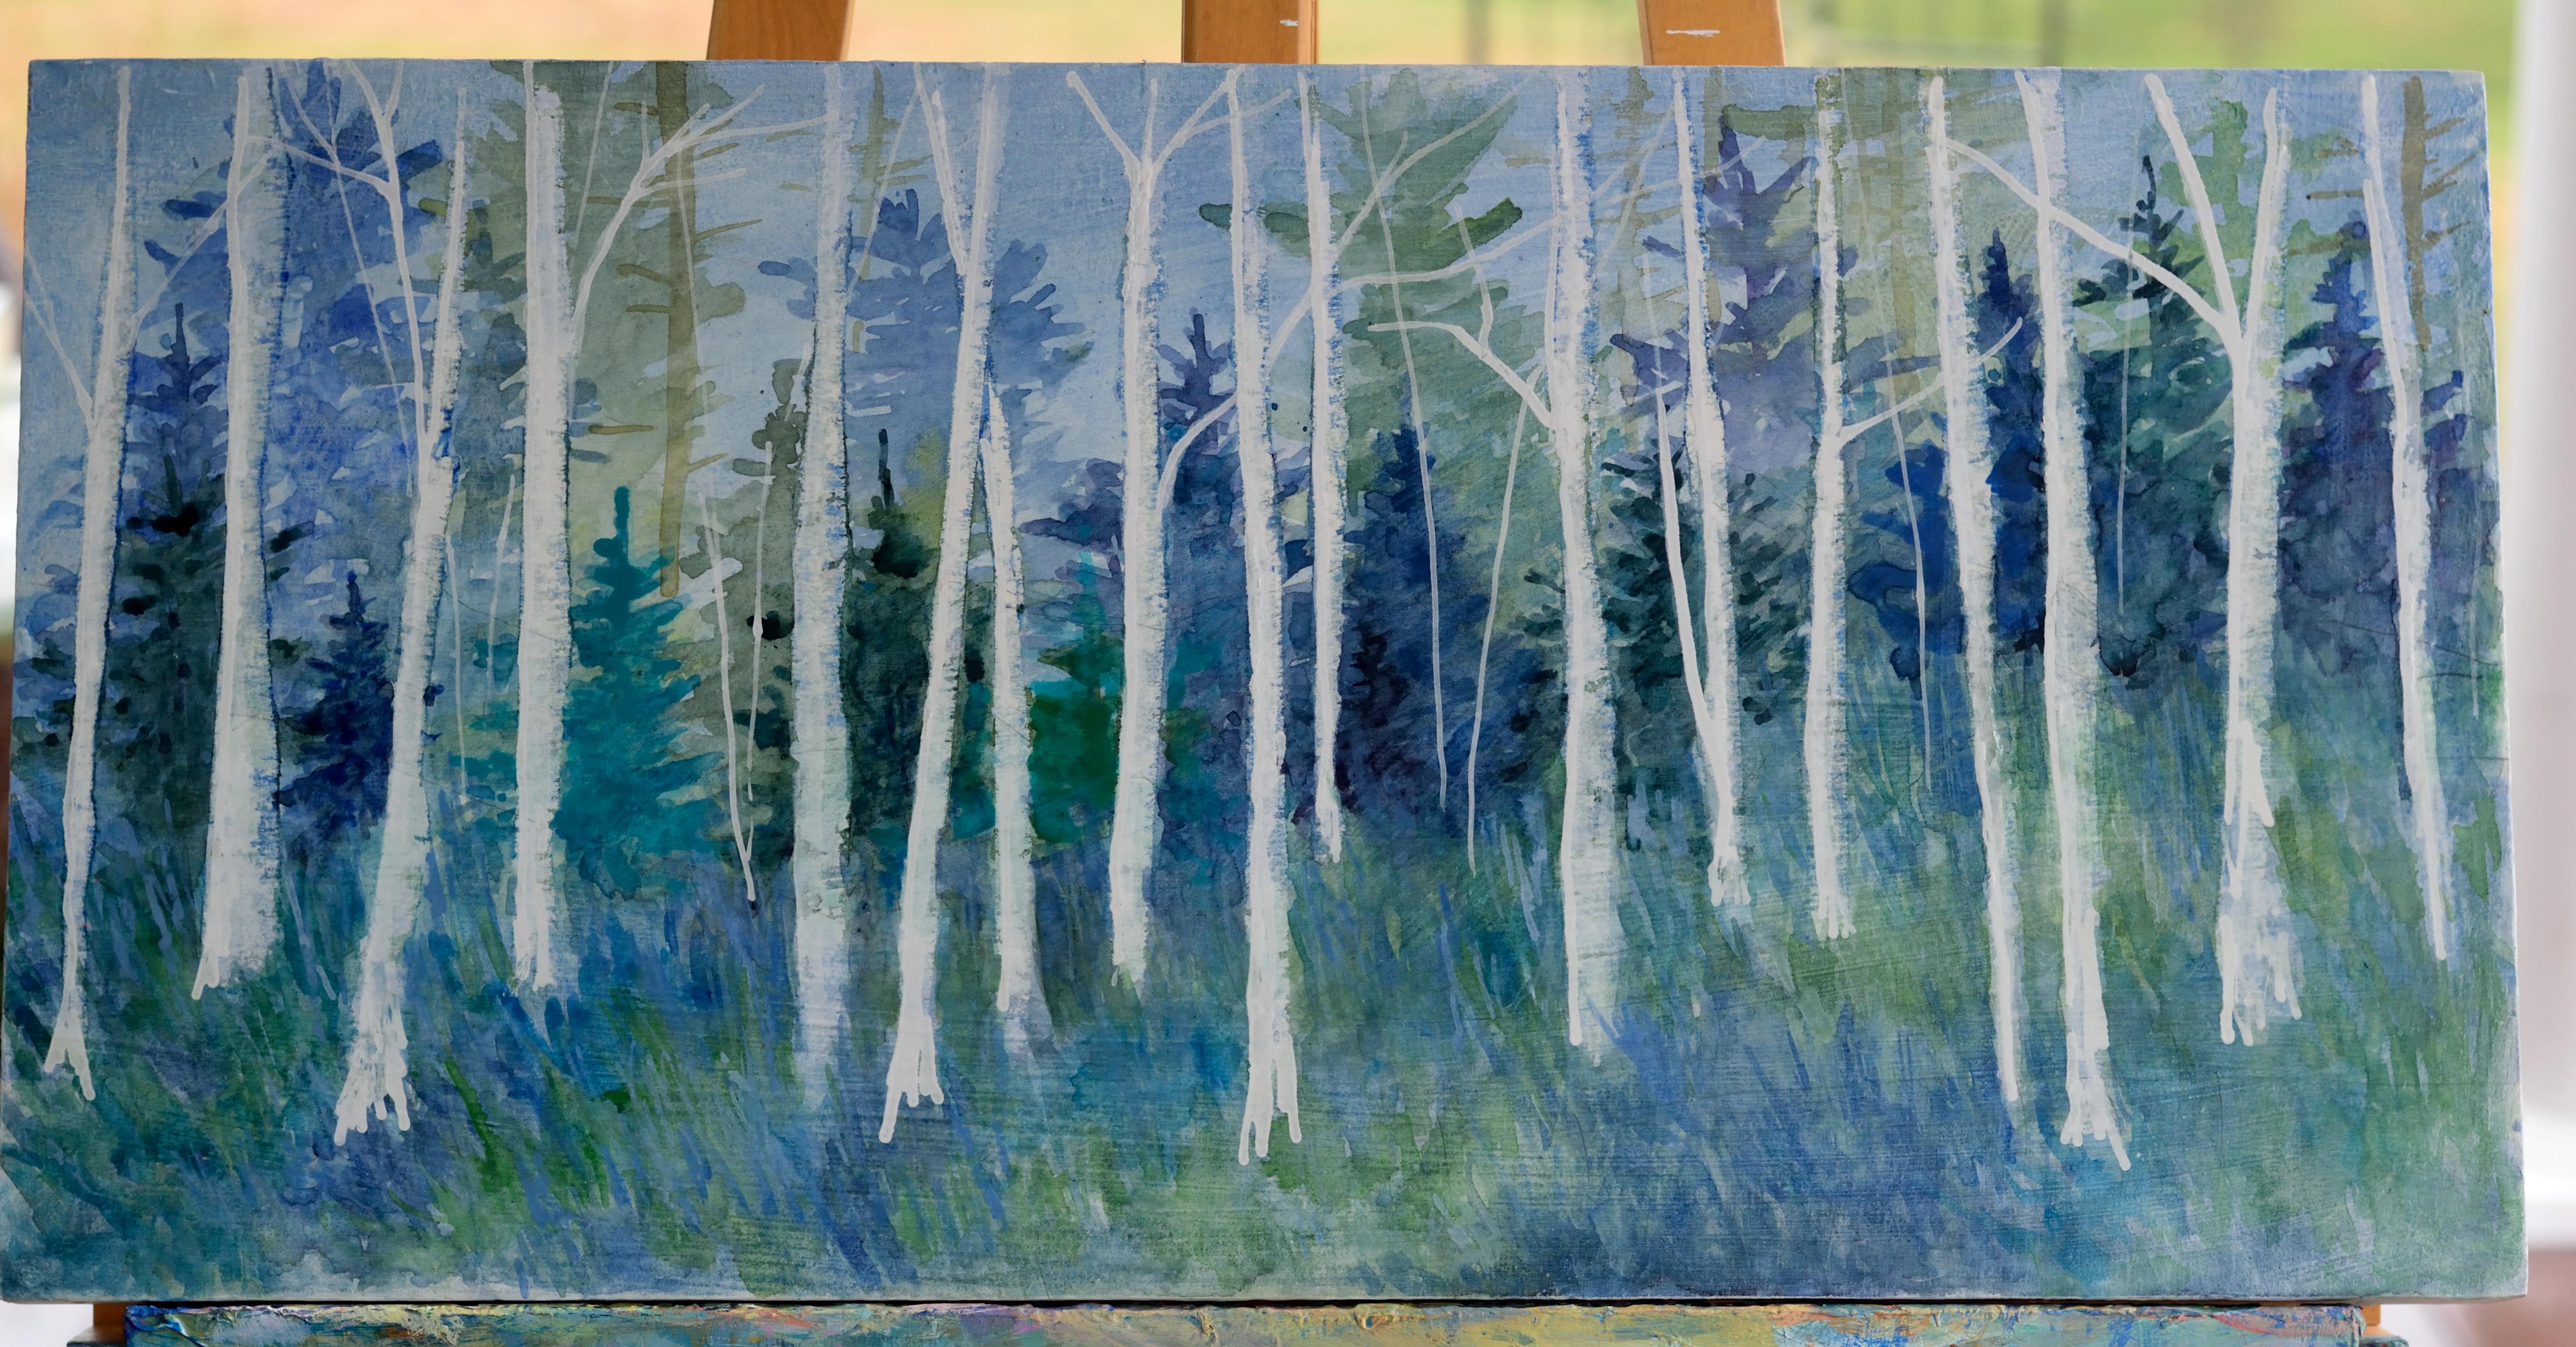 <p>Artist Comments<br />A whimsical scene of the forest, in blues and lavenders.</p><p>About the Artist<br />Inspired by the long lingering sunsets of humid mid-atlantic summers and the soft greens of New Hampshire and Vermont, Tamara Gonda’s